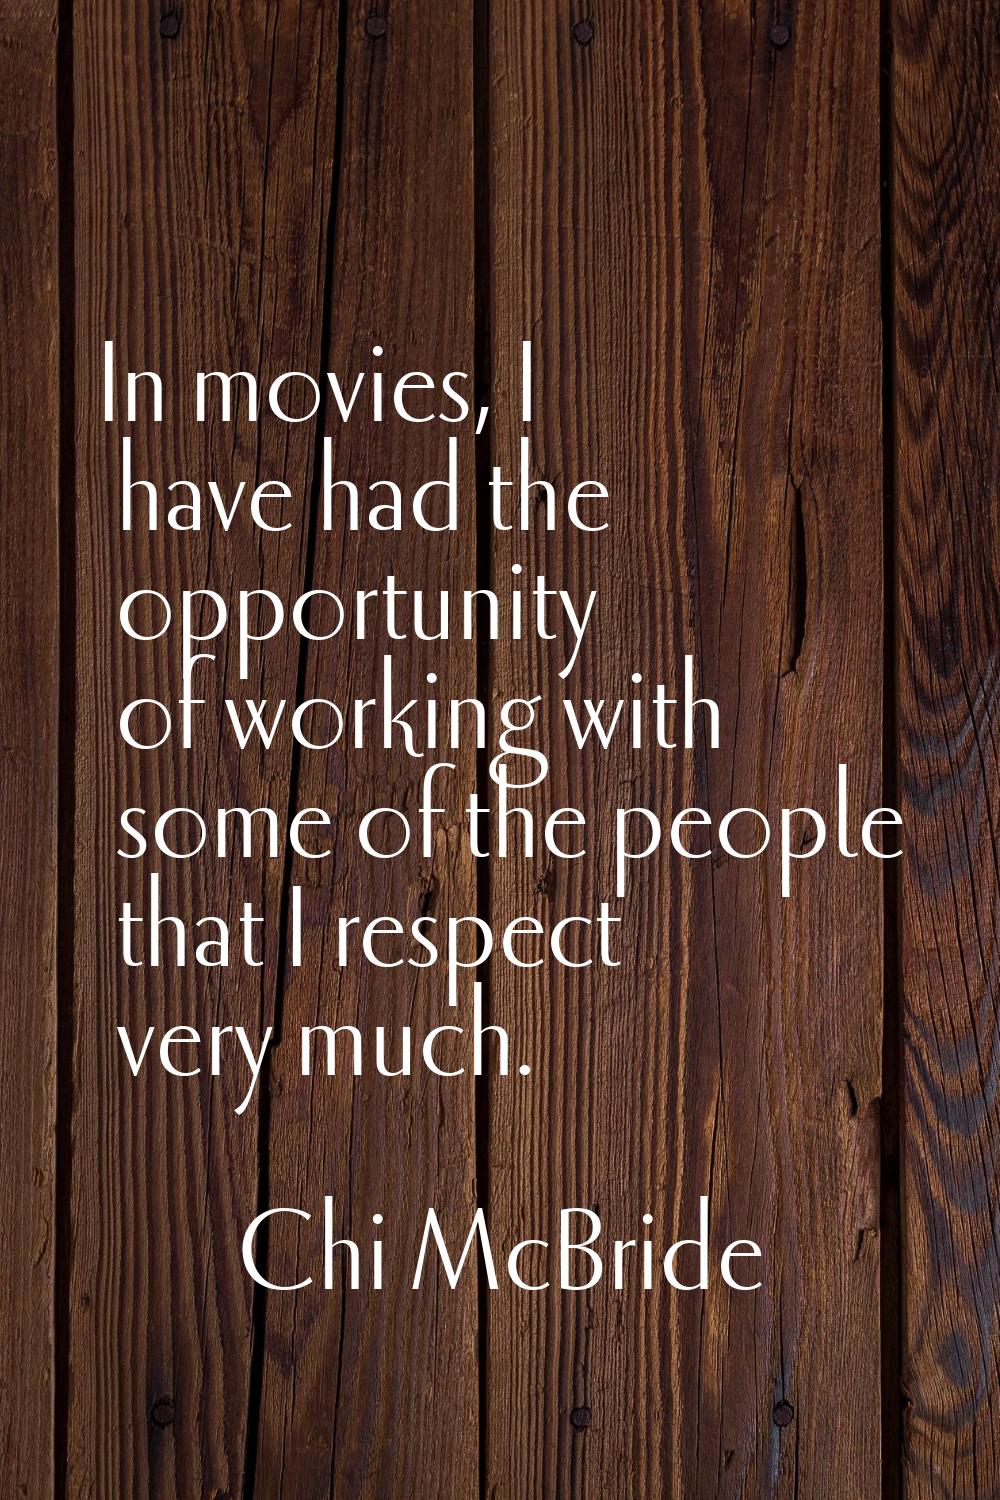 In movies, I have had the opportunity of working with some of the people that I respect very much.